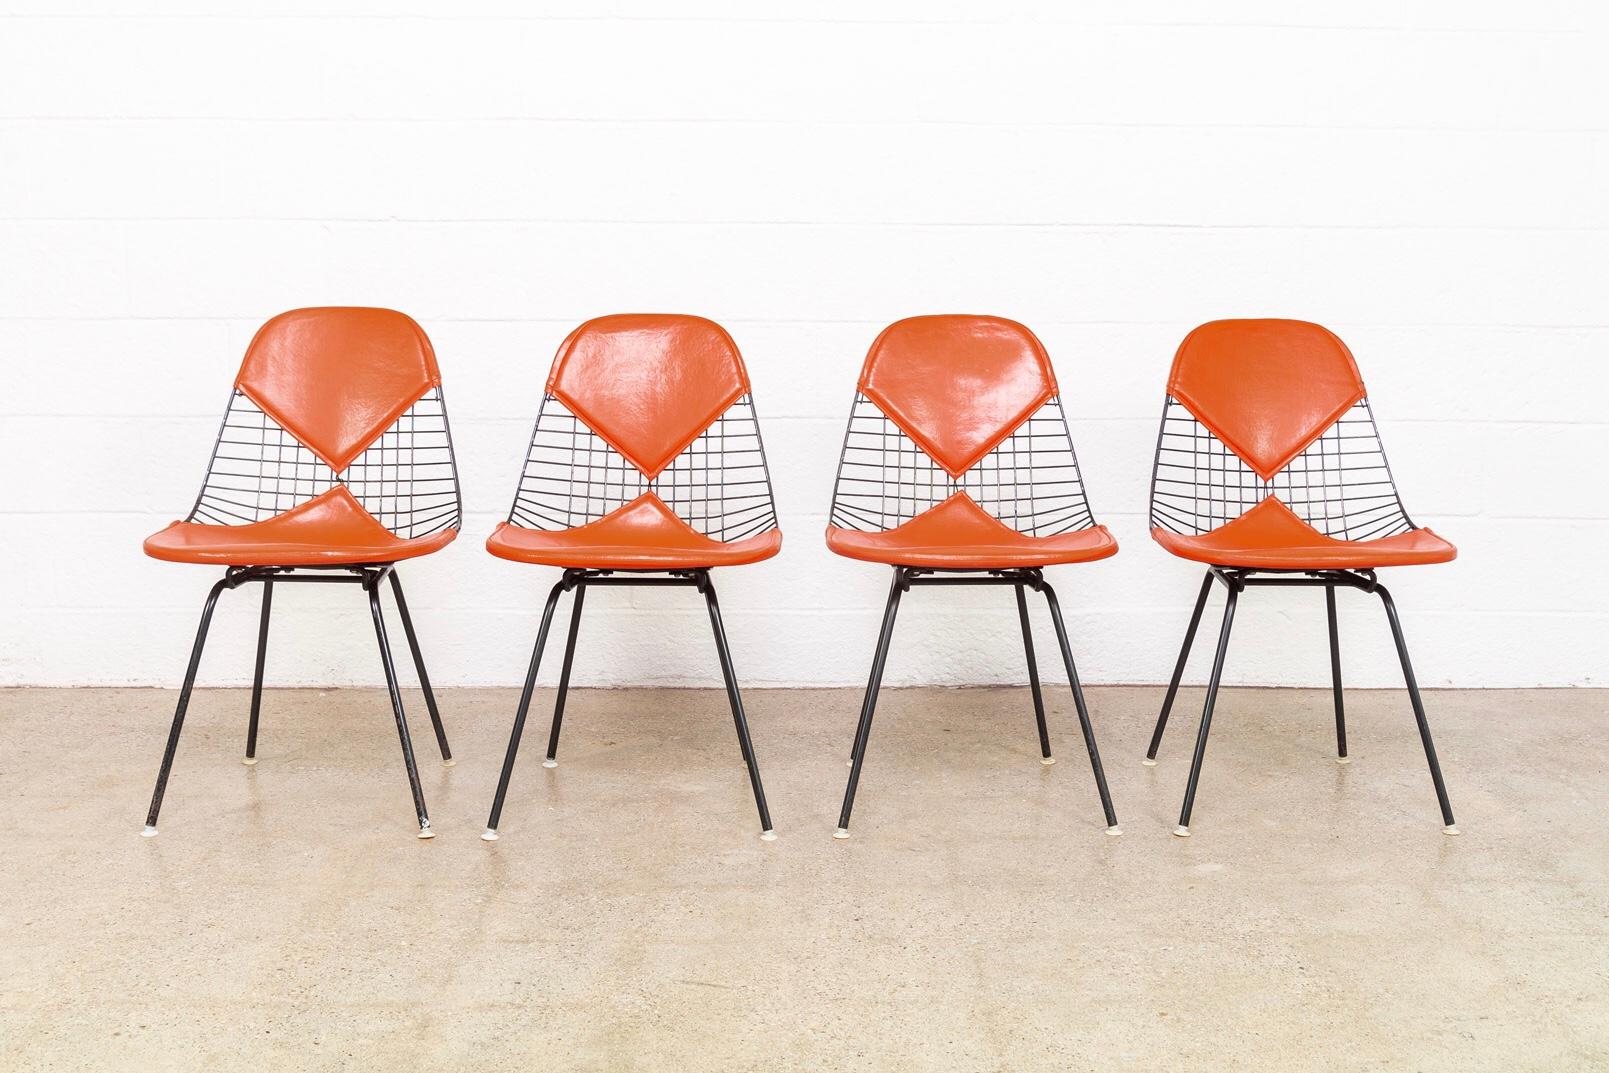 These original vintage Charles and Ray Eames for Herman Miller DKX-2 red bikini chairs designed in the late 1950s are early production circa 1960. The iconic modernist design features welded black steel wire tubular frames with H-bases and original